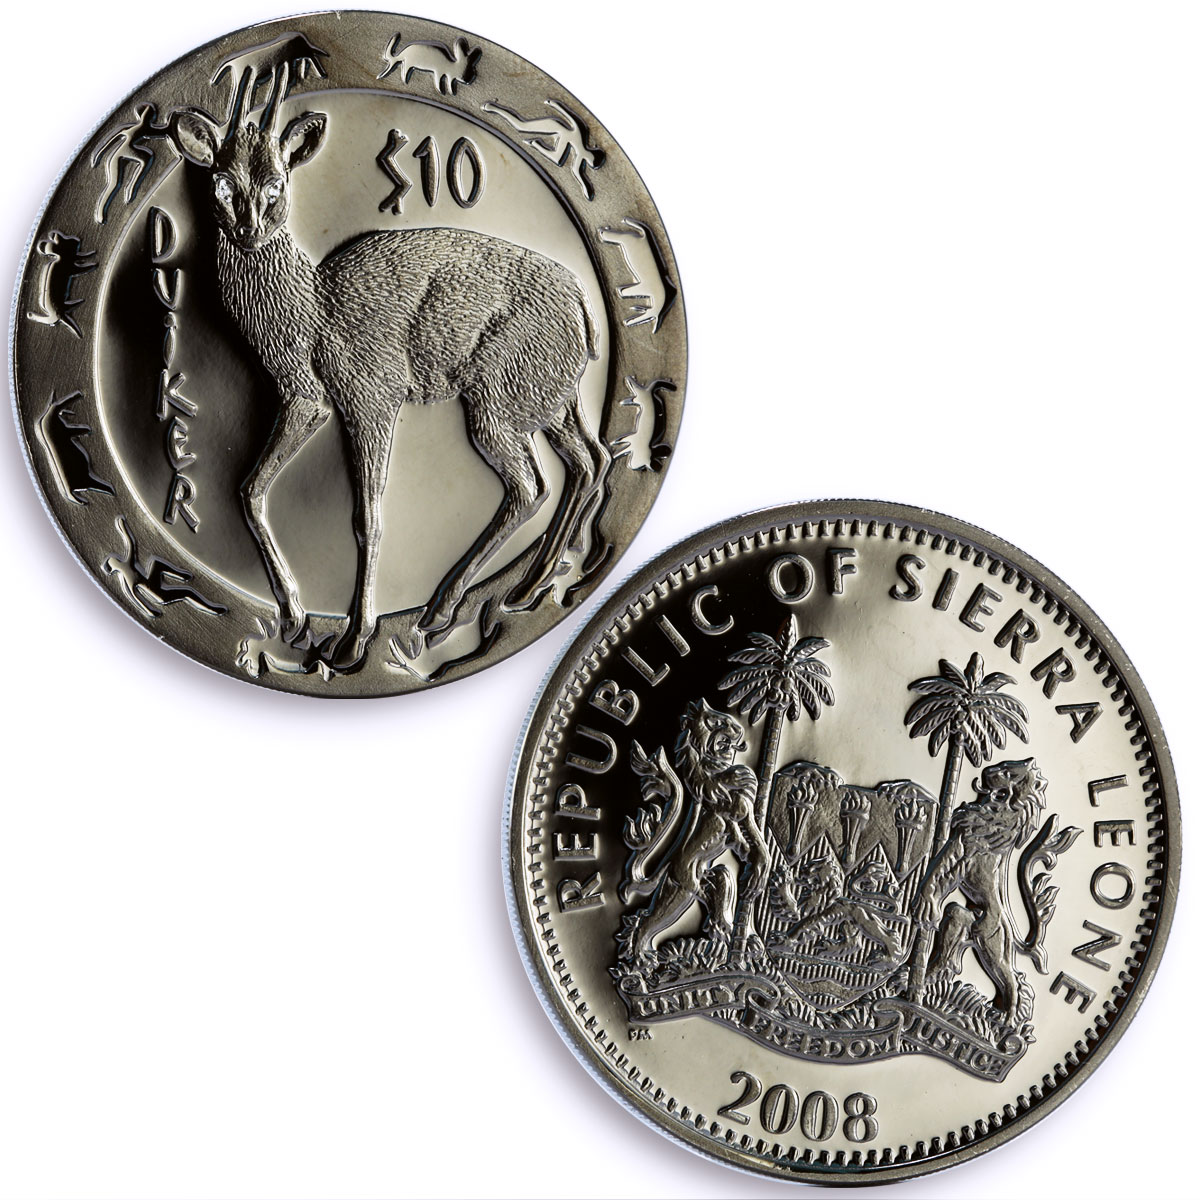 Sierra Leone set of 4 coins Nocturnal Animals African Fauna silver coins 2008